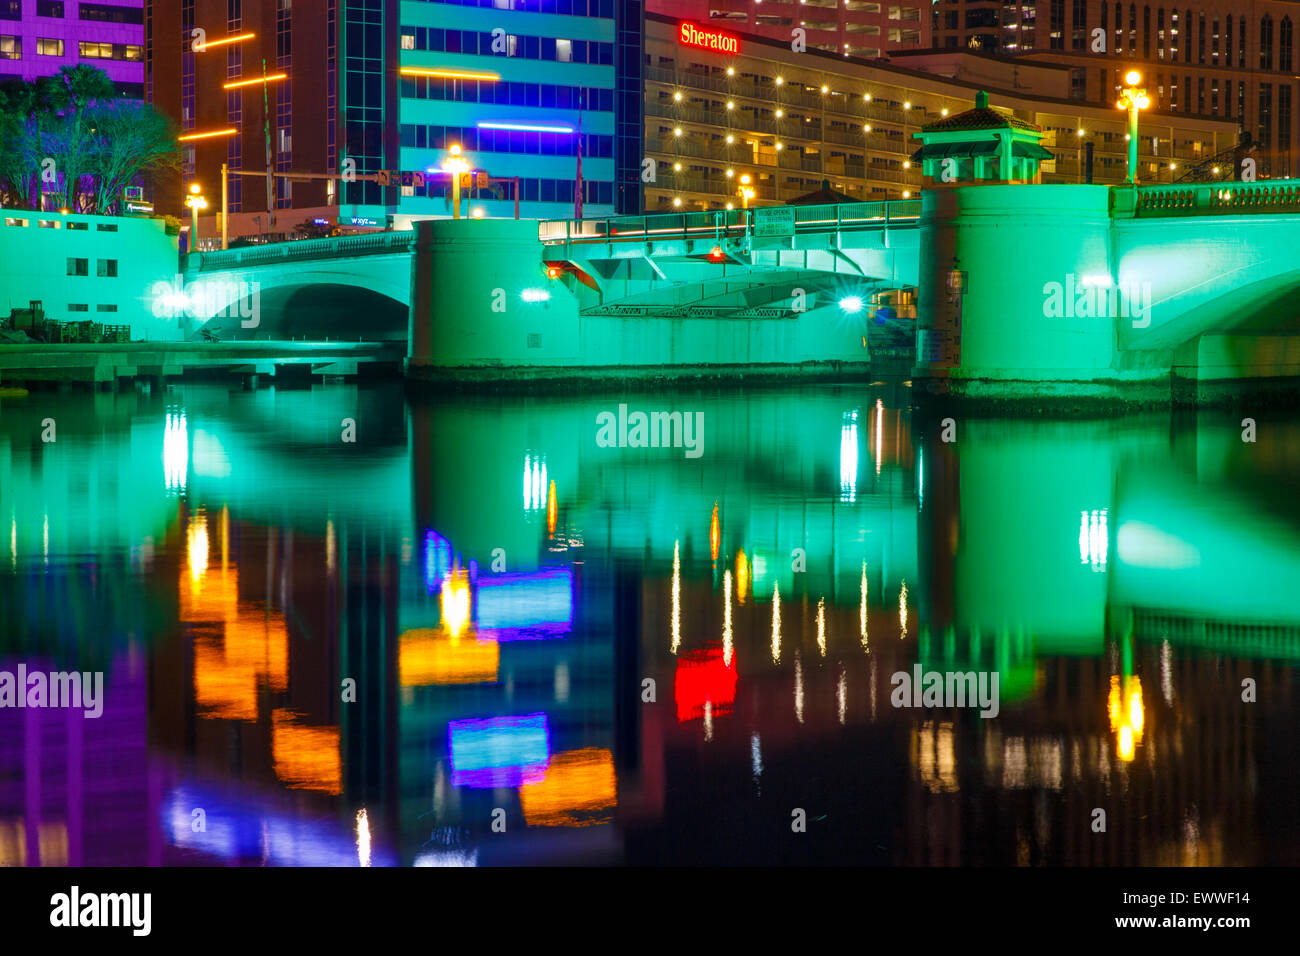 FEBRUARY 20, 2015 - TAMPA, FLORIDA: The City of Tampa is awash in color as its reflected in the Hillsborough River during the Li Stock Photo